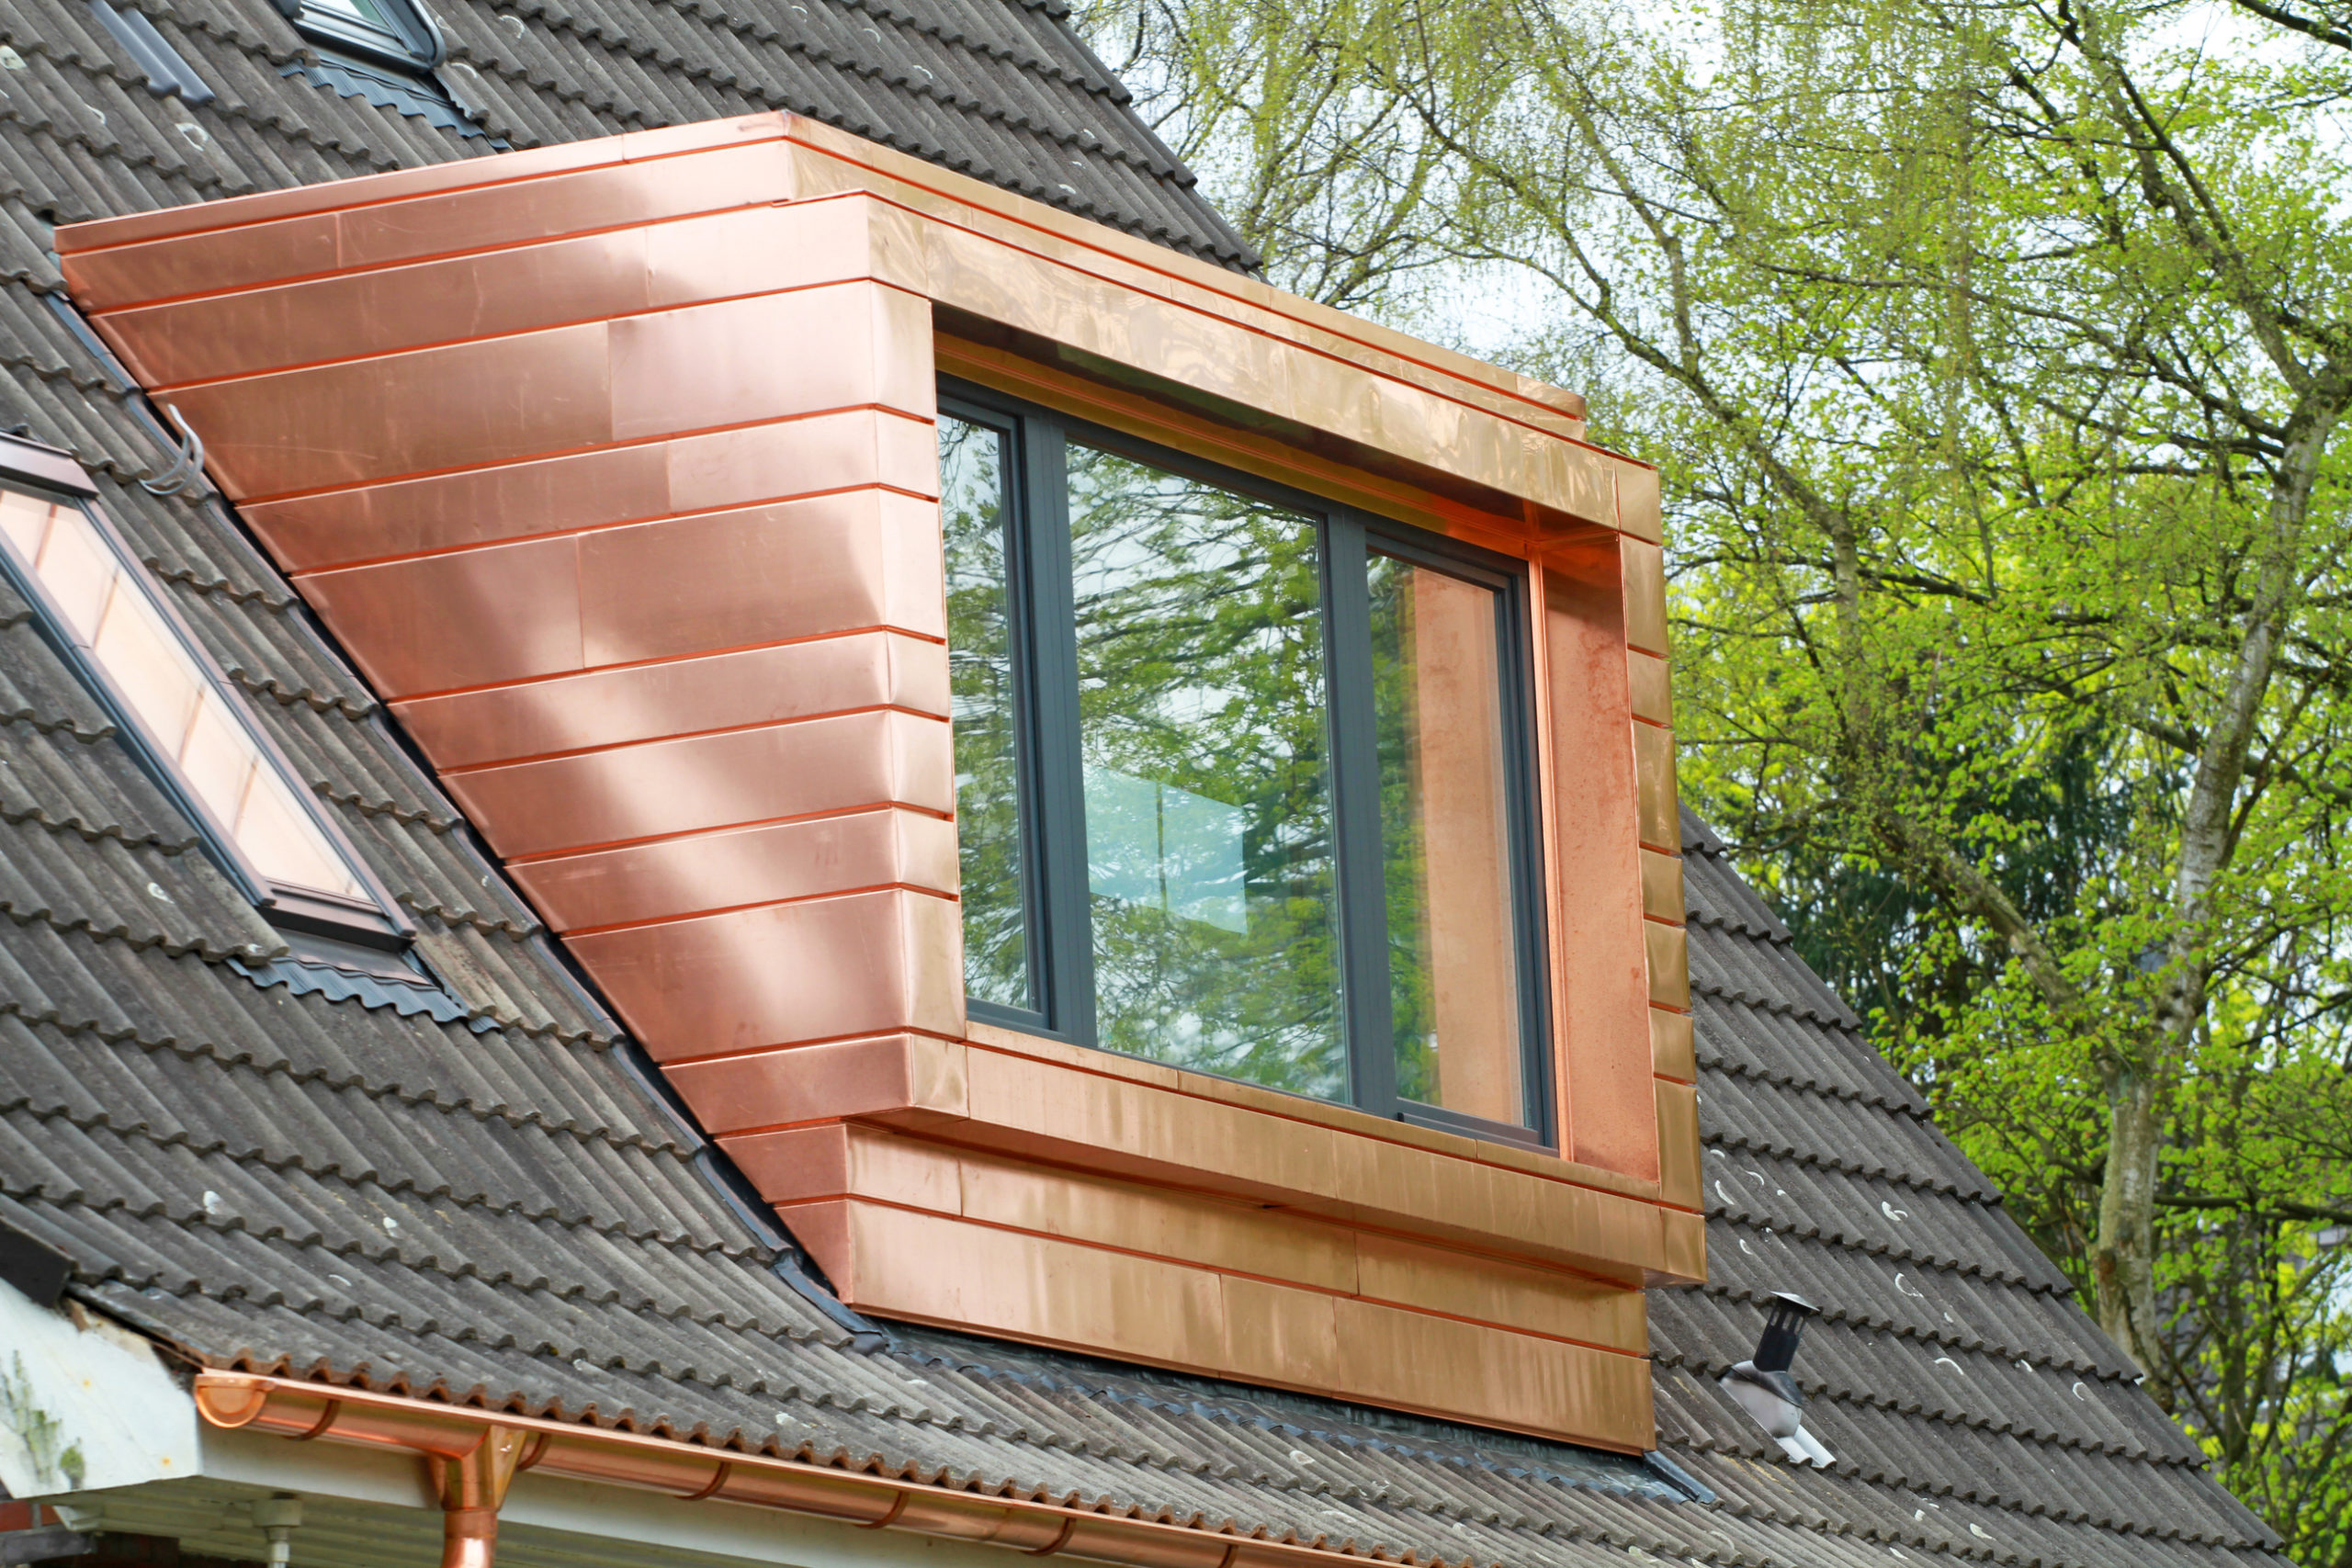 The Pros And Cons of Copper Sheets Roofing